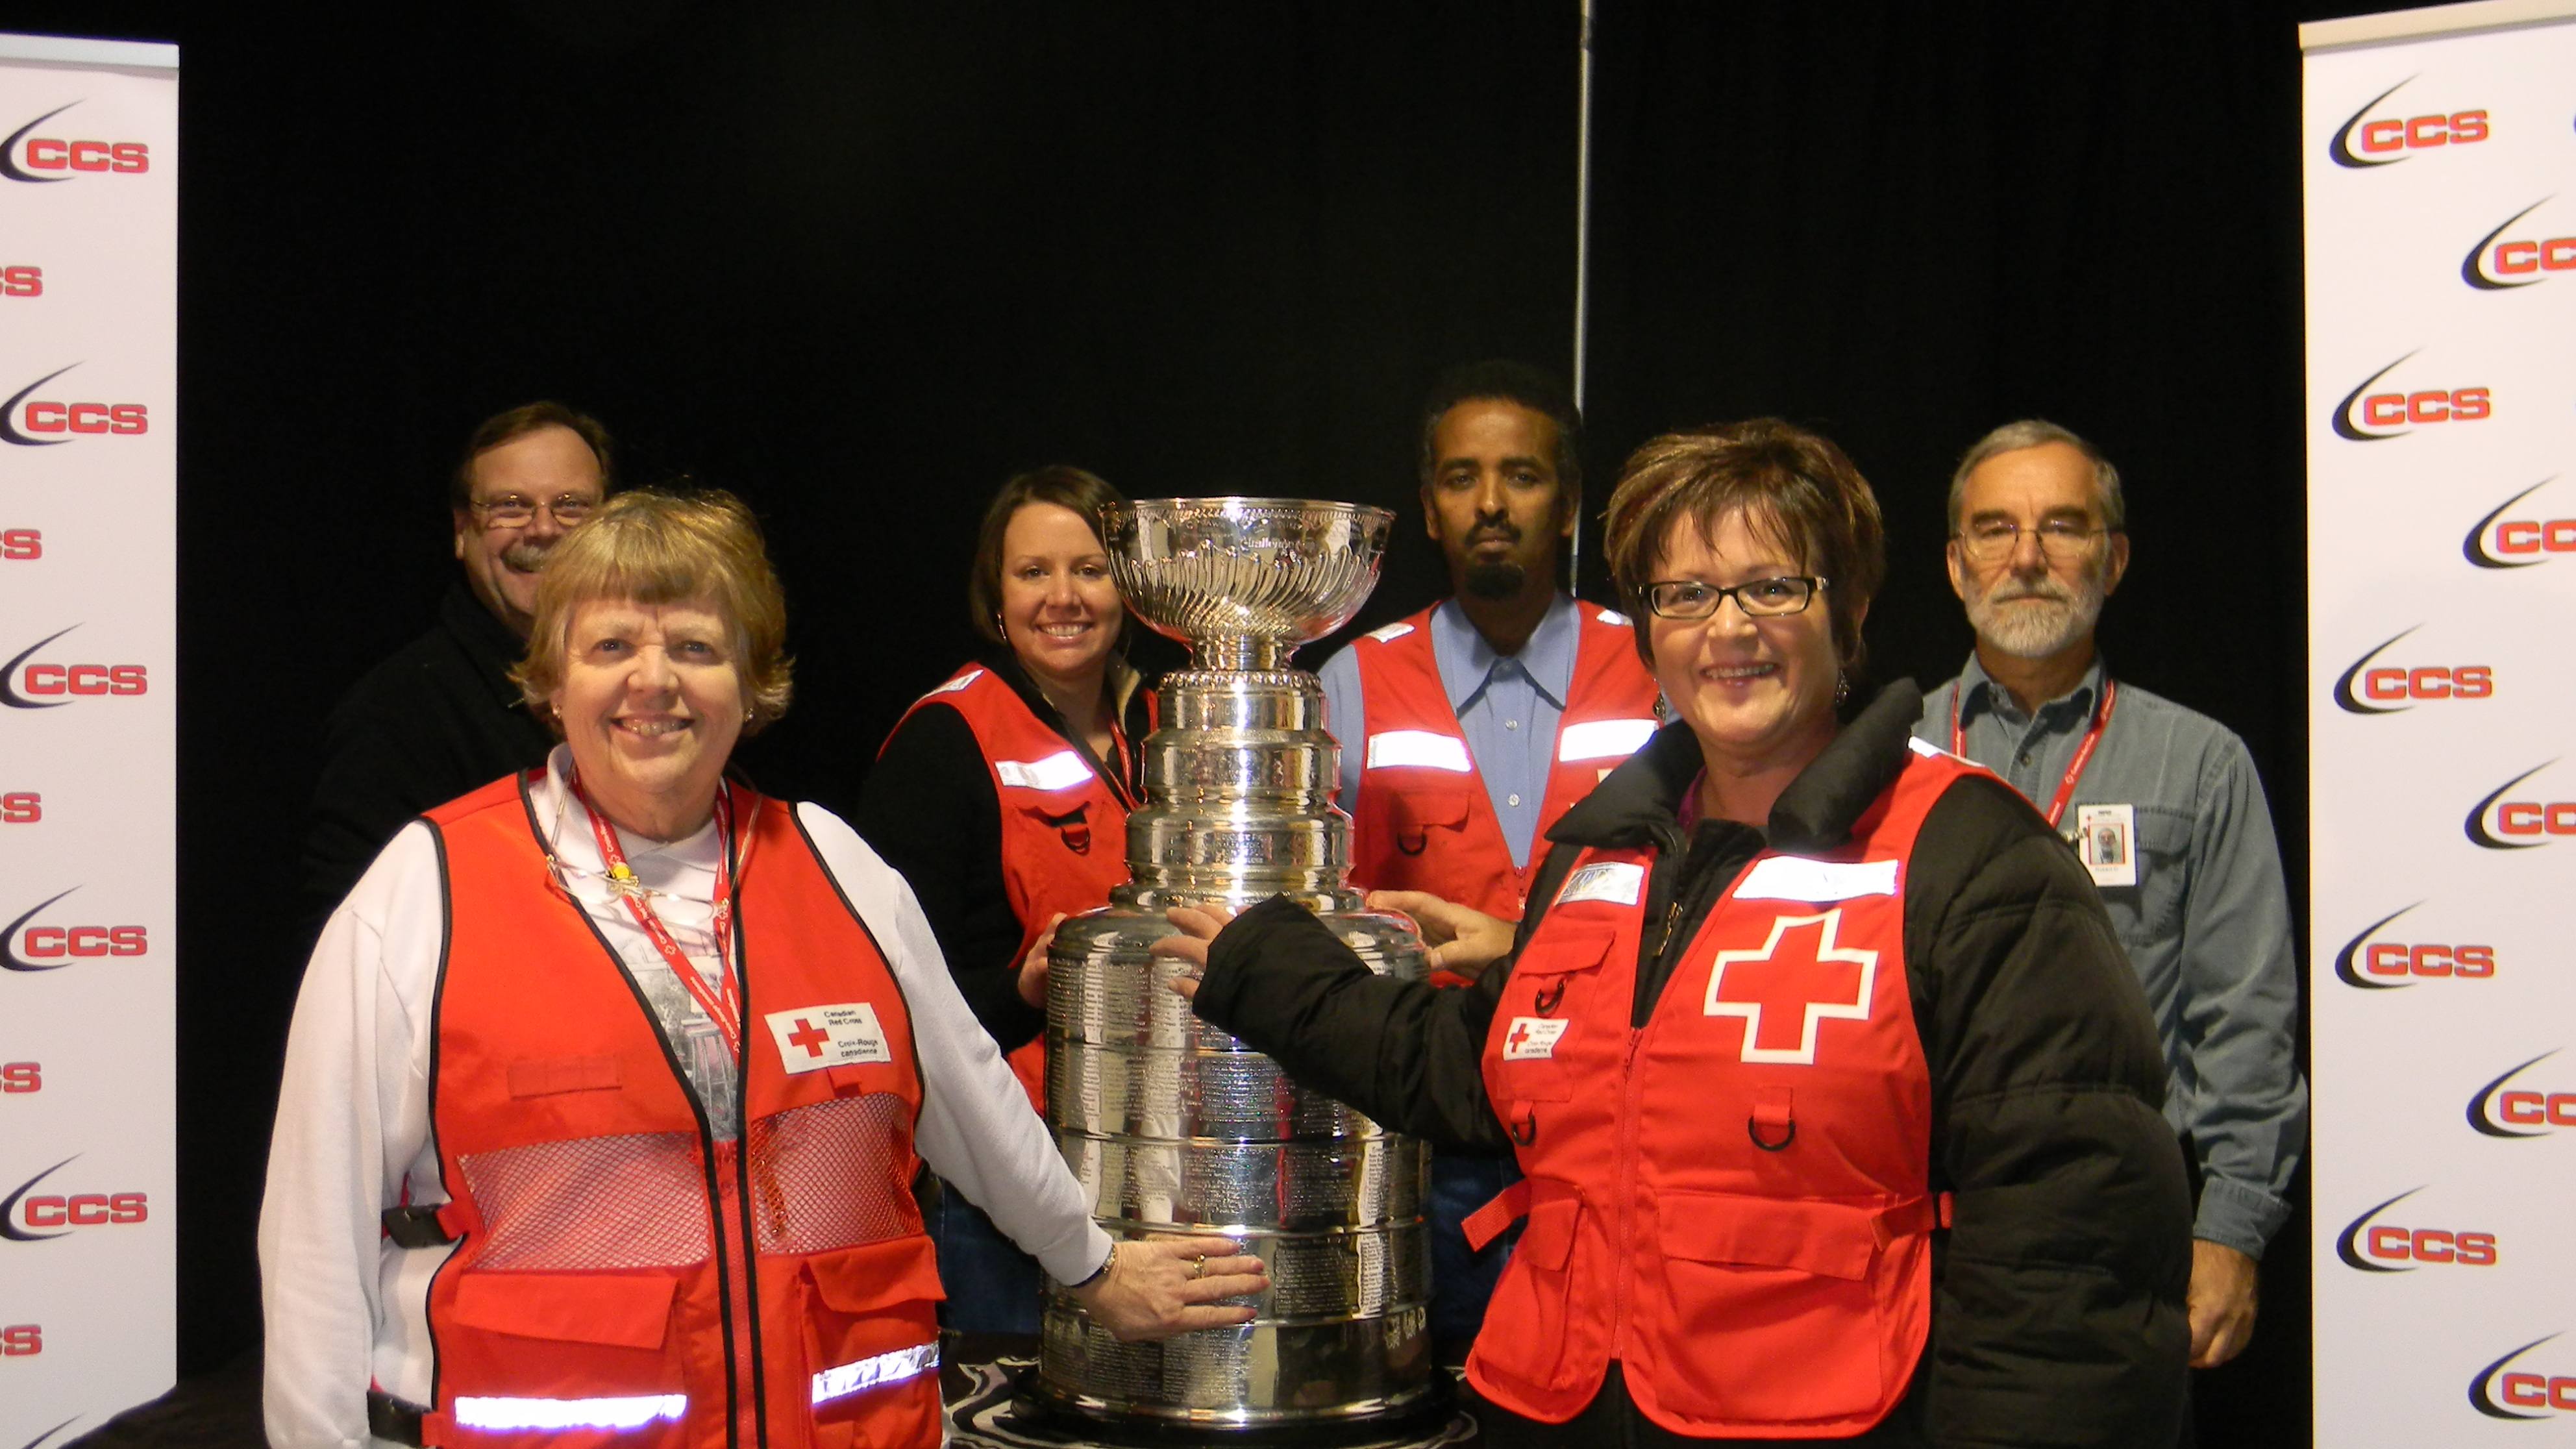 Red Cross personnel working in Slave Lake, Alberta pose with the Stanley Cup.